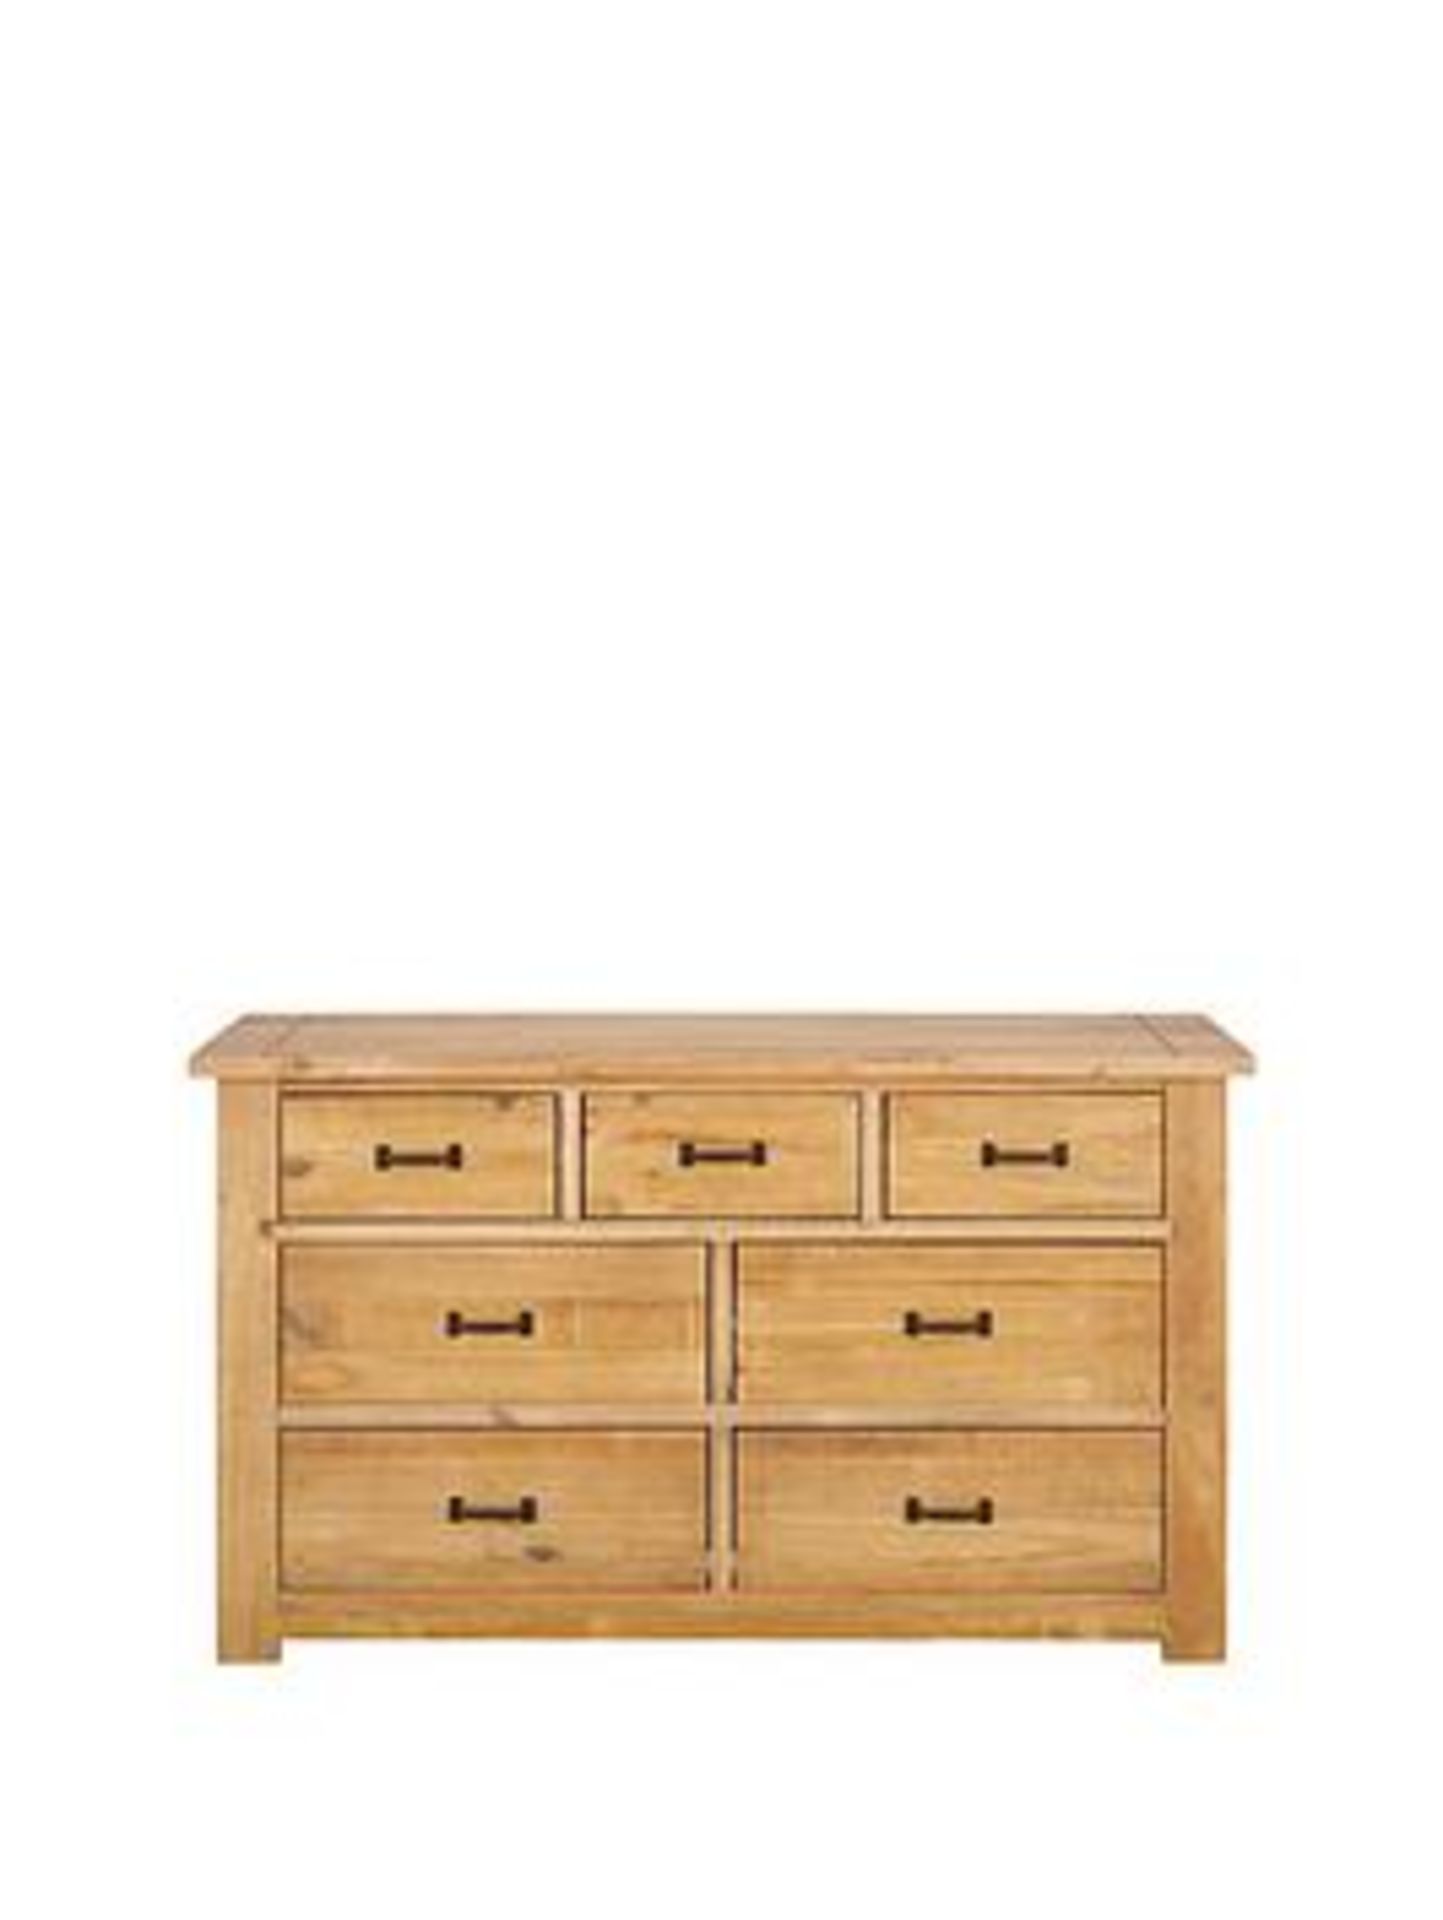 Boxed Item Albion 7 Drawers Chest [Pine] 77X125X40Cm Rrp:£474.0 - Image 2 of 2